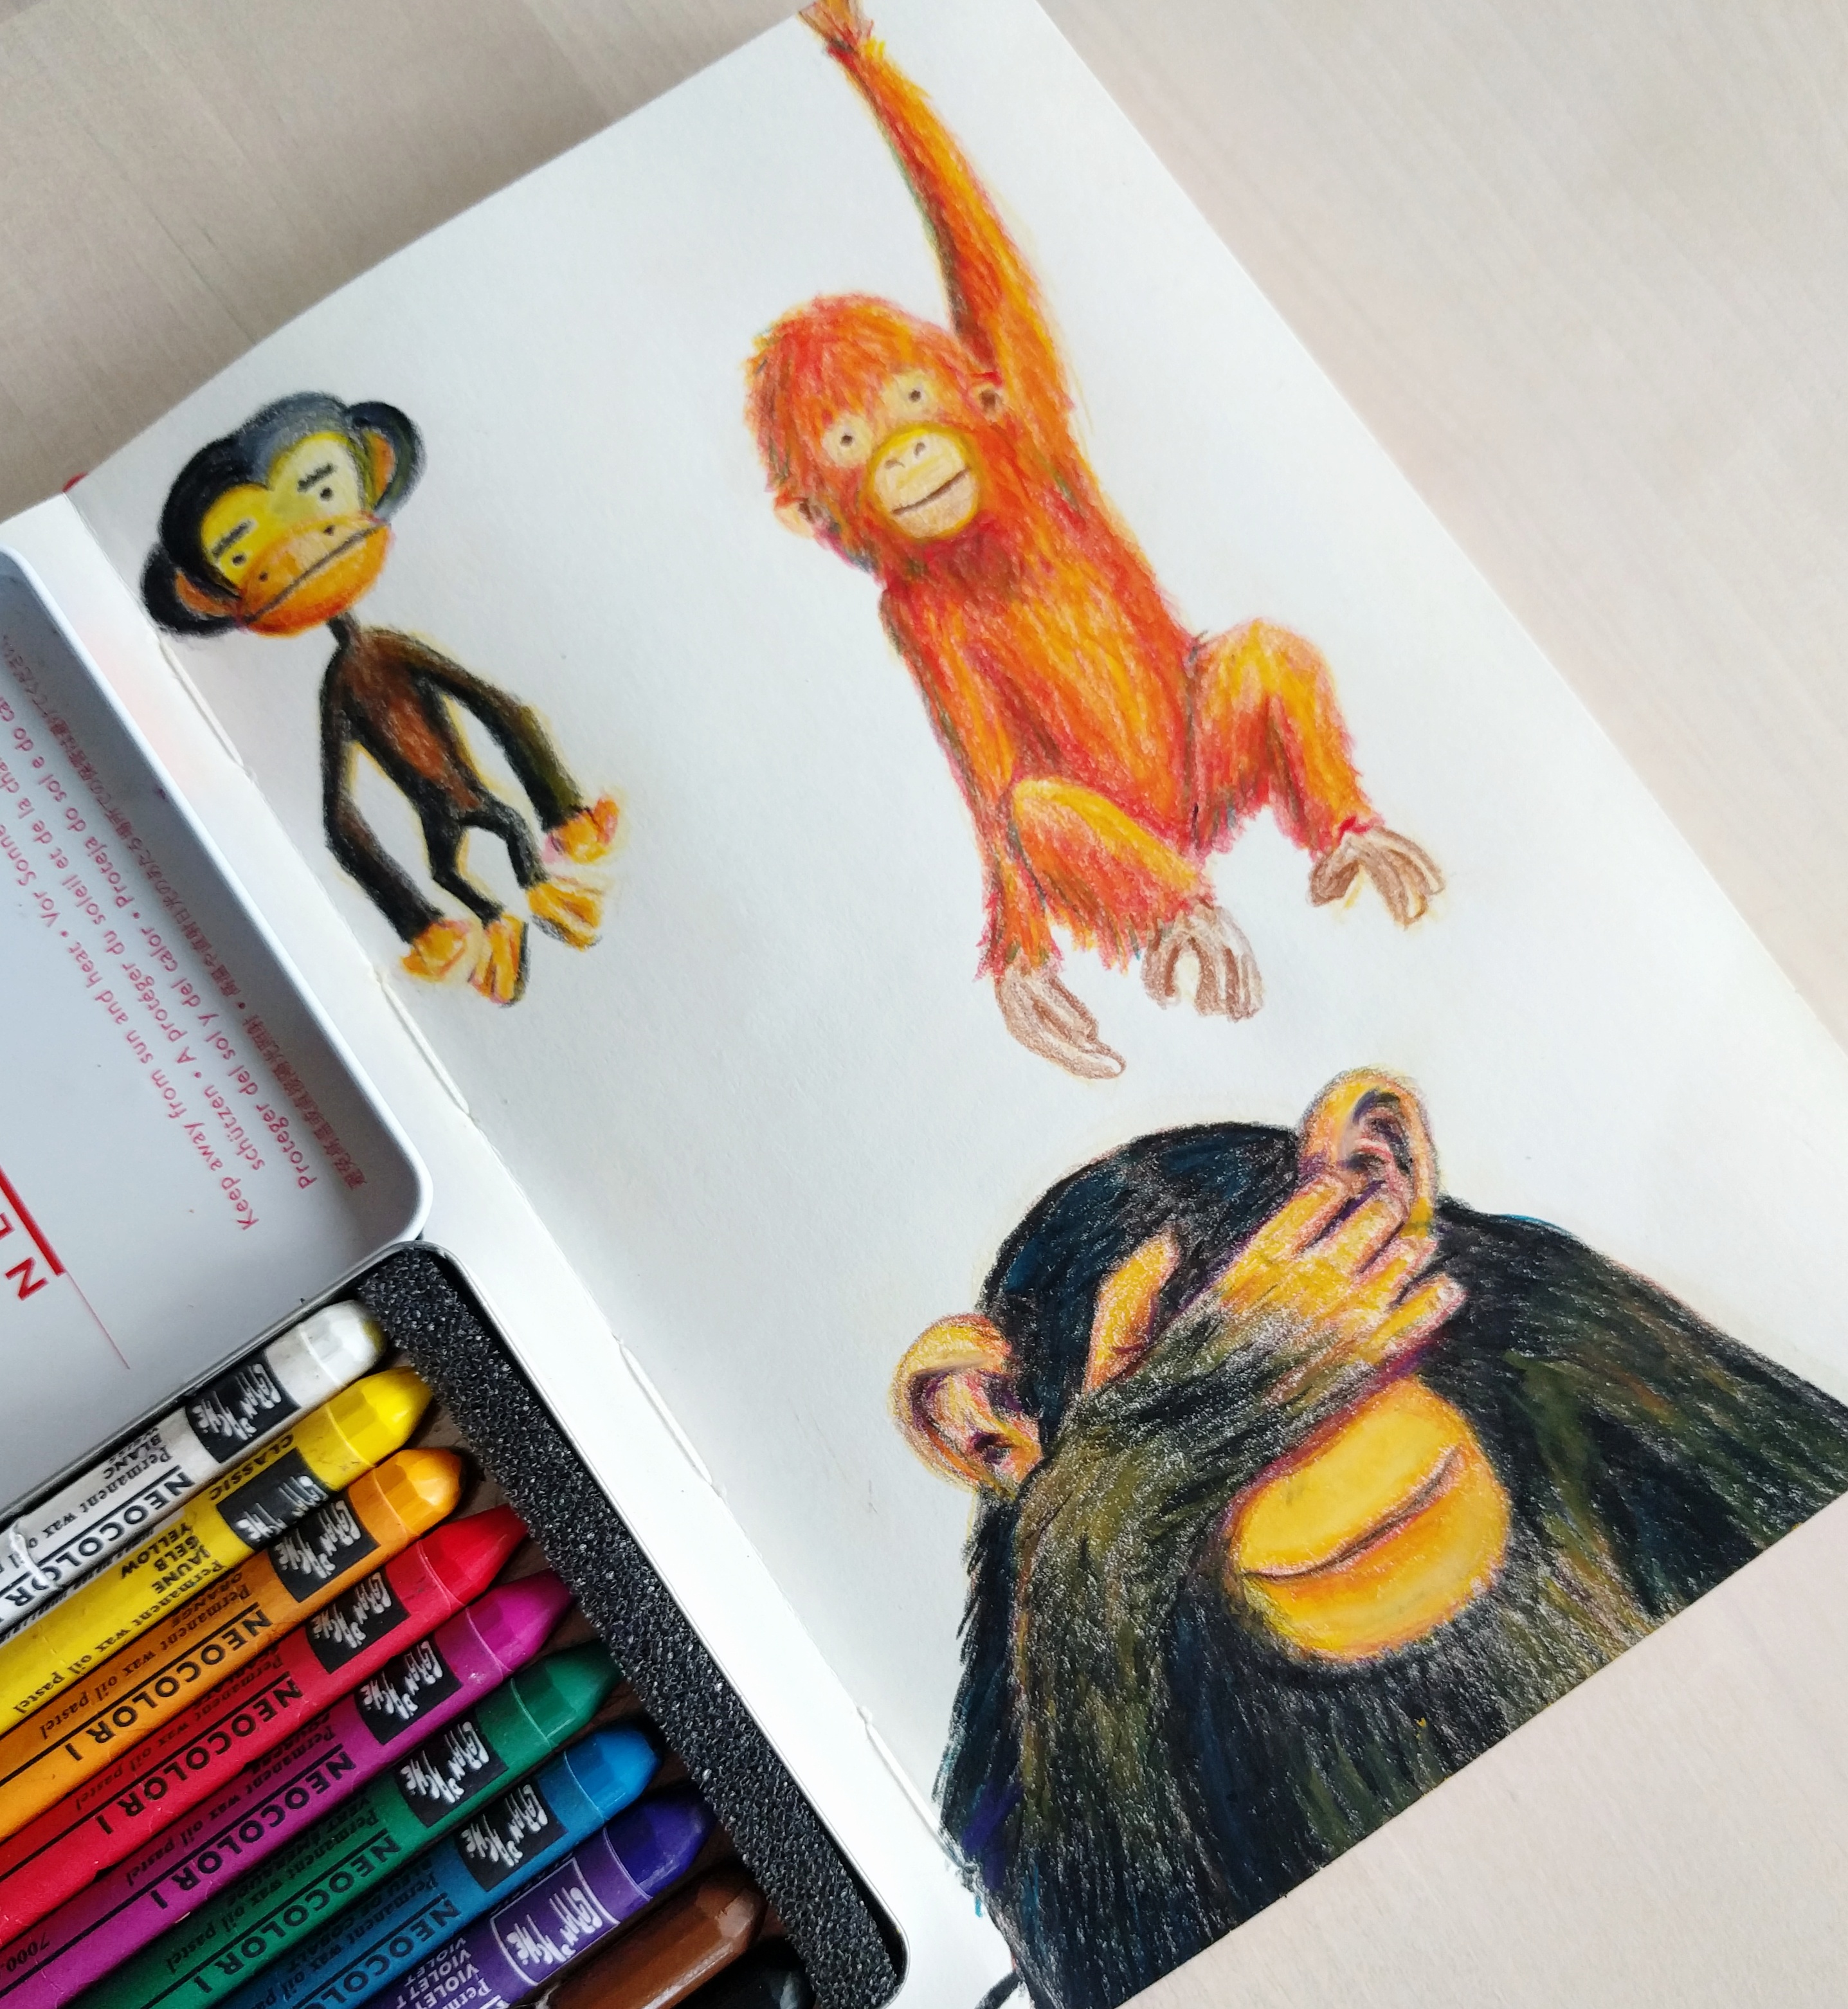 Monkeys with crayons